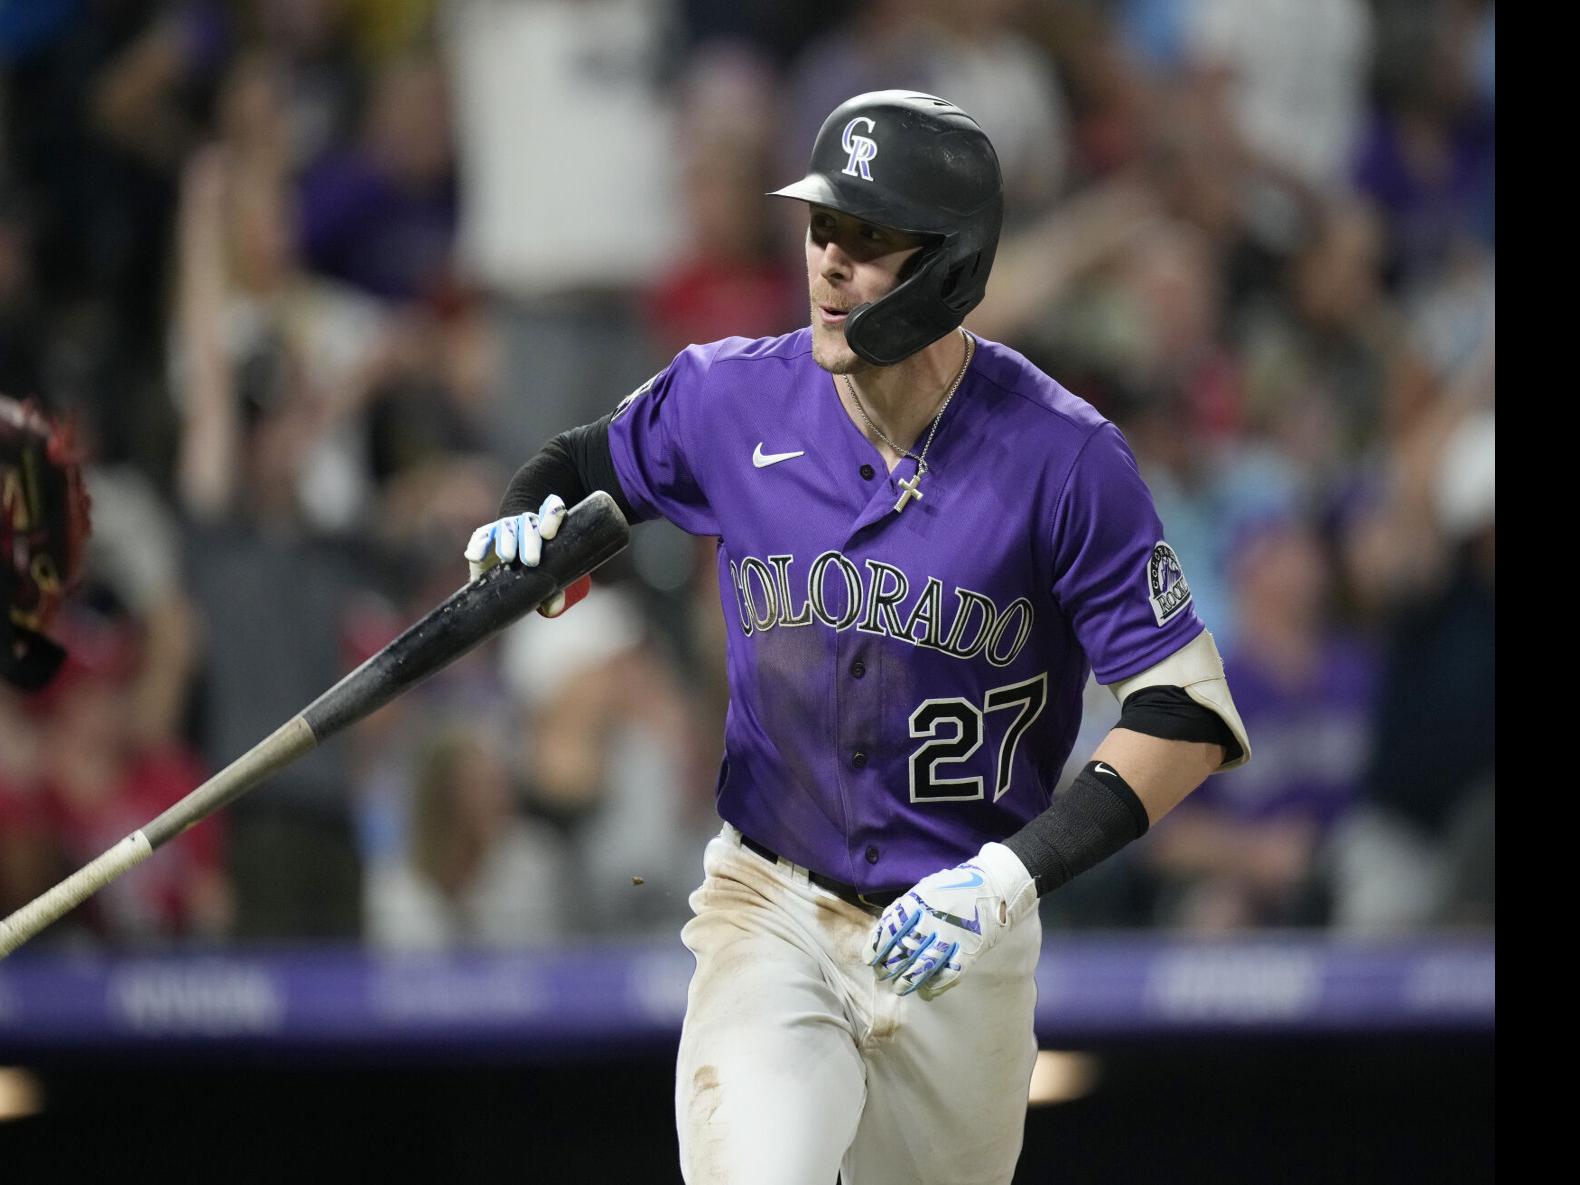 Shohei Ohtani announces participation in 2021 Home Run Derby at Coors Field  – Greeley Tribune